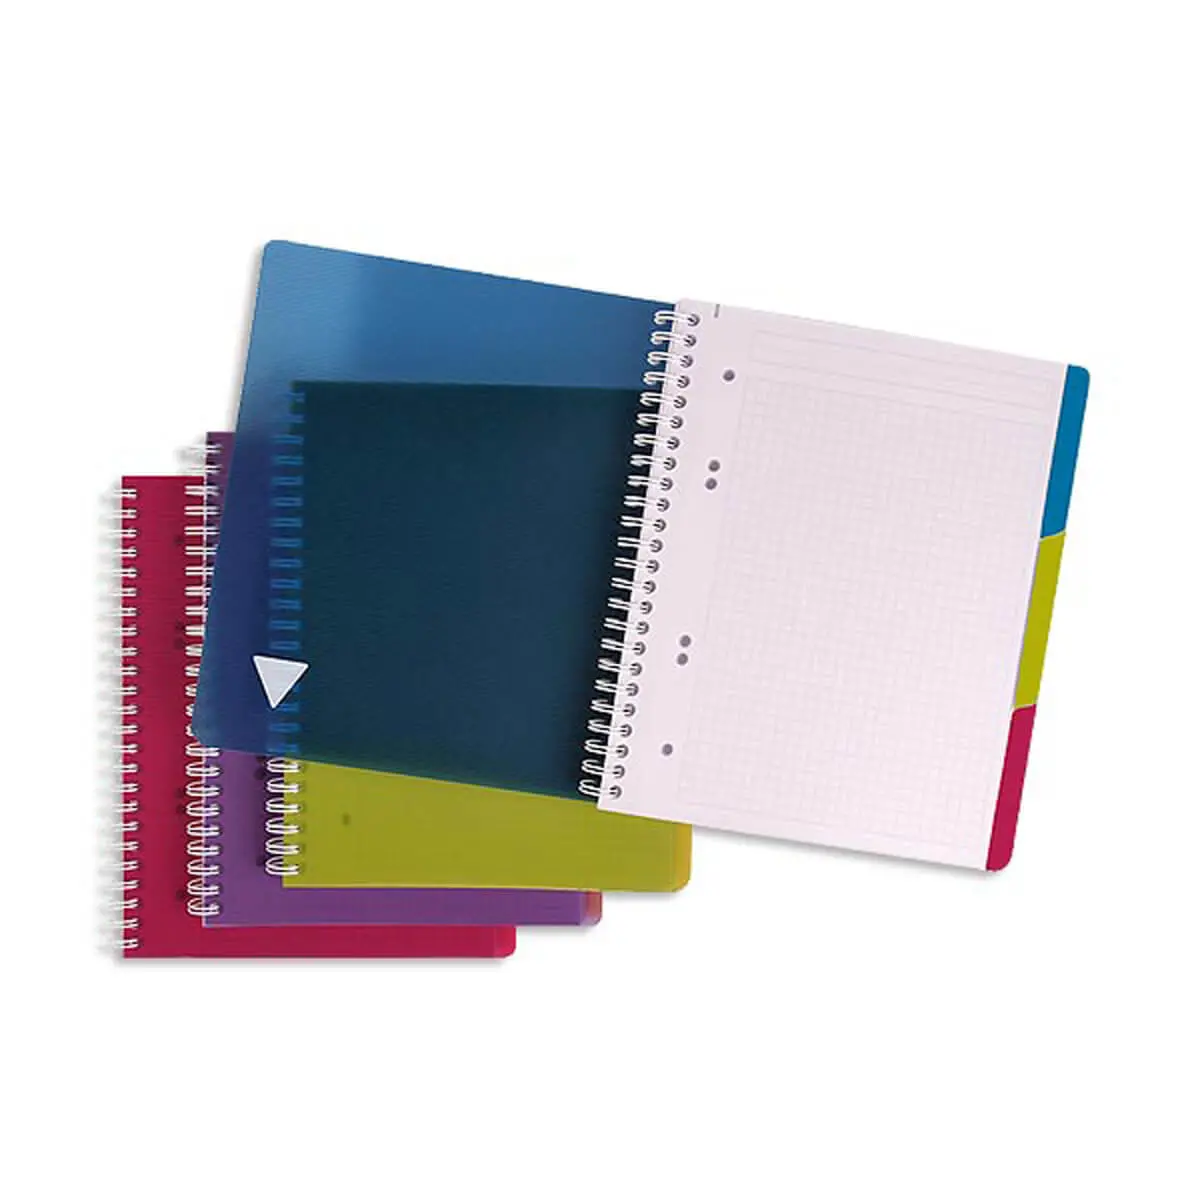 Cahier spirale Clairefontaine Linicolor A5 14,8 x 21 cm